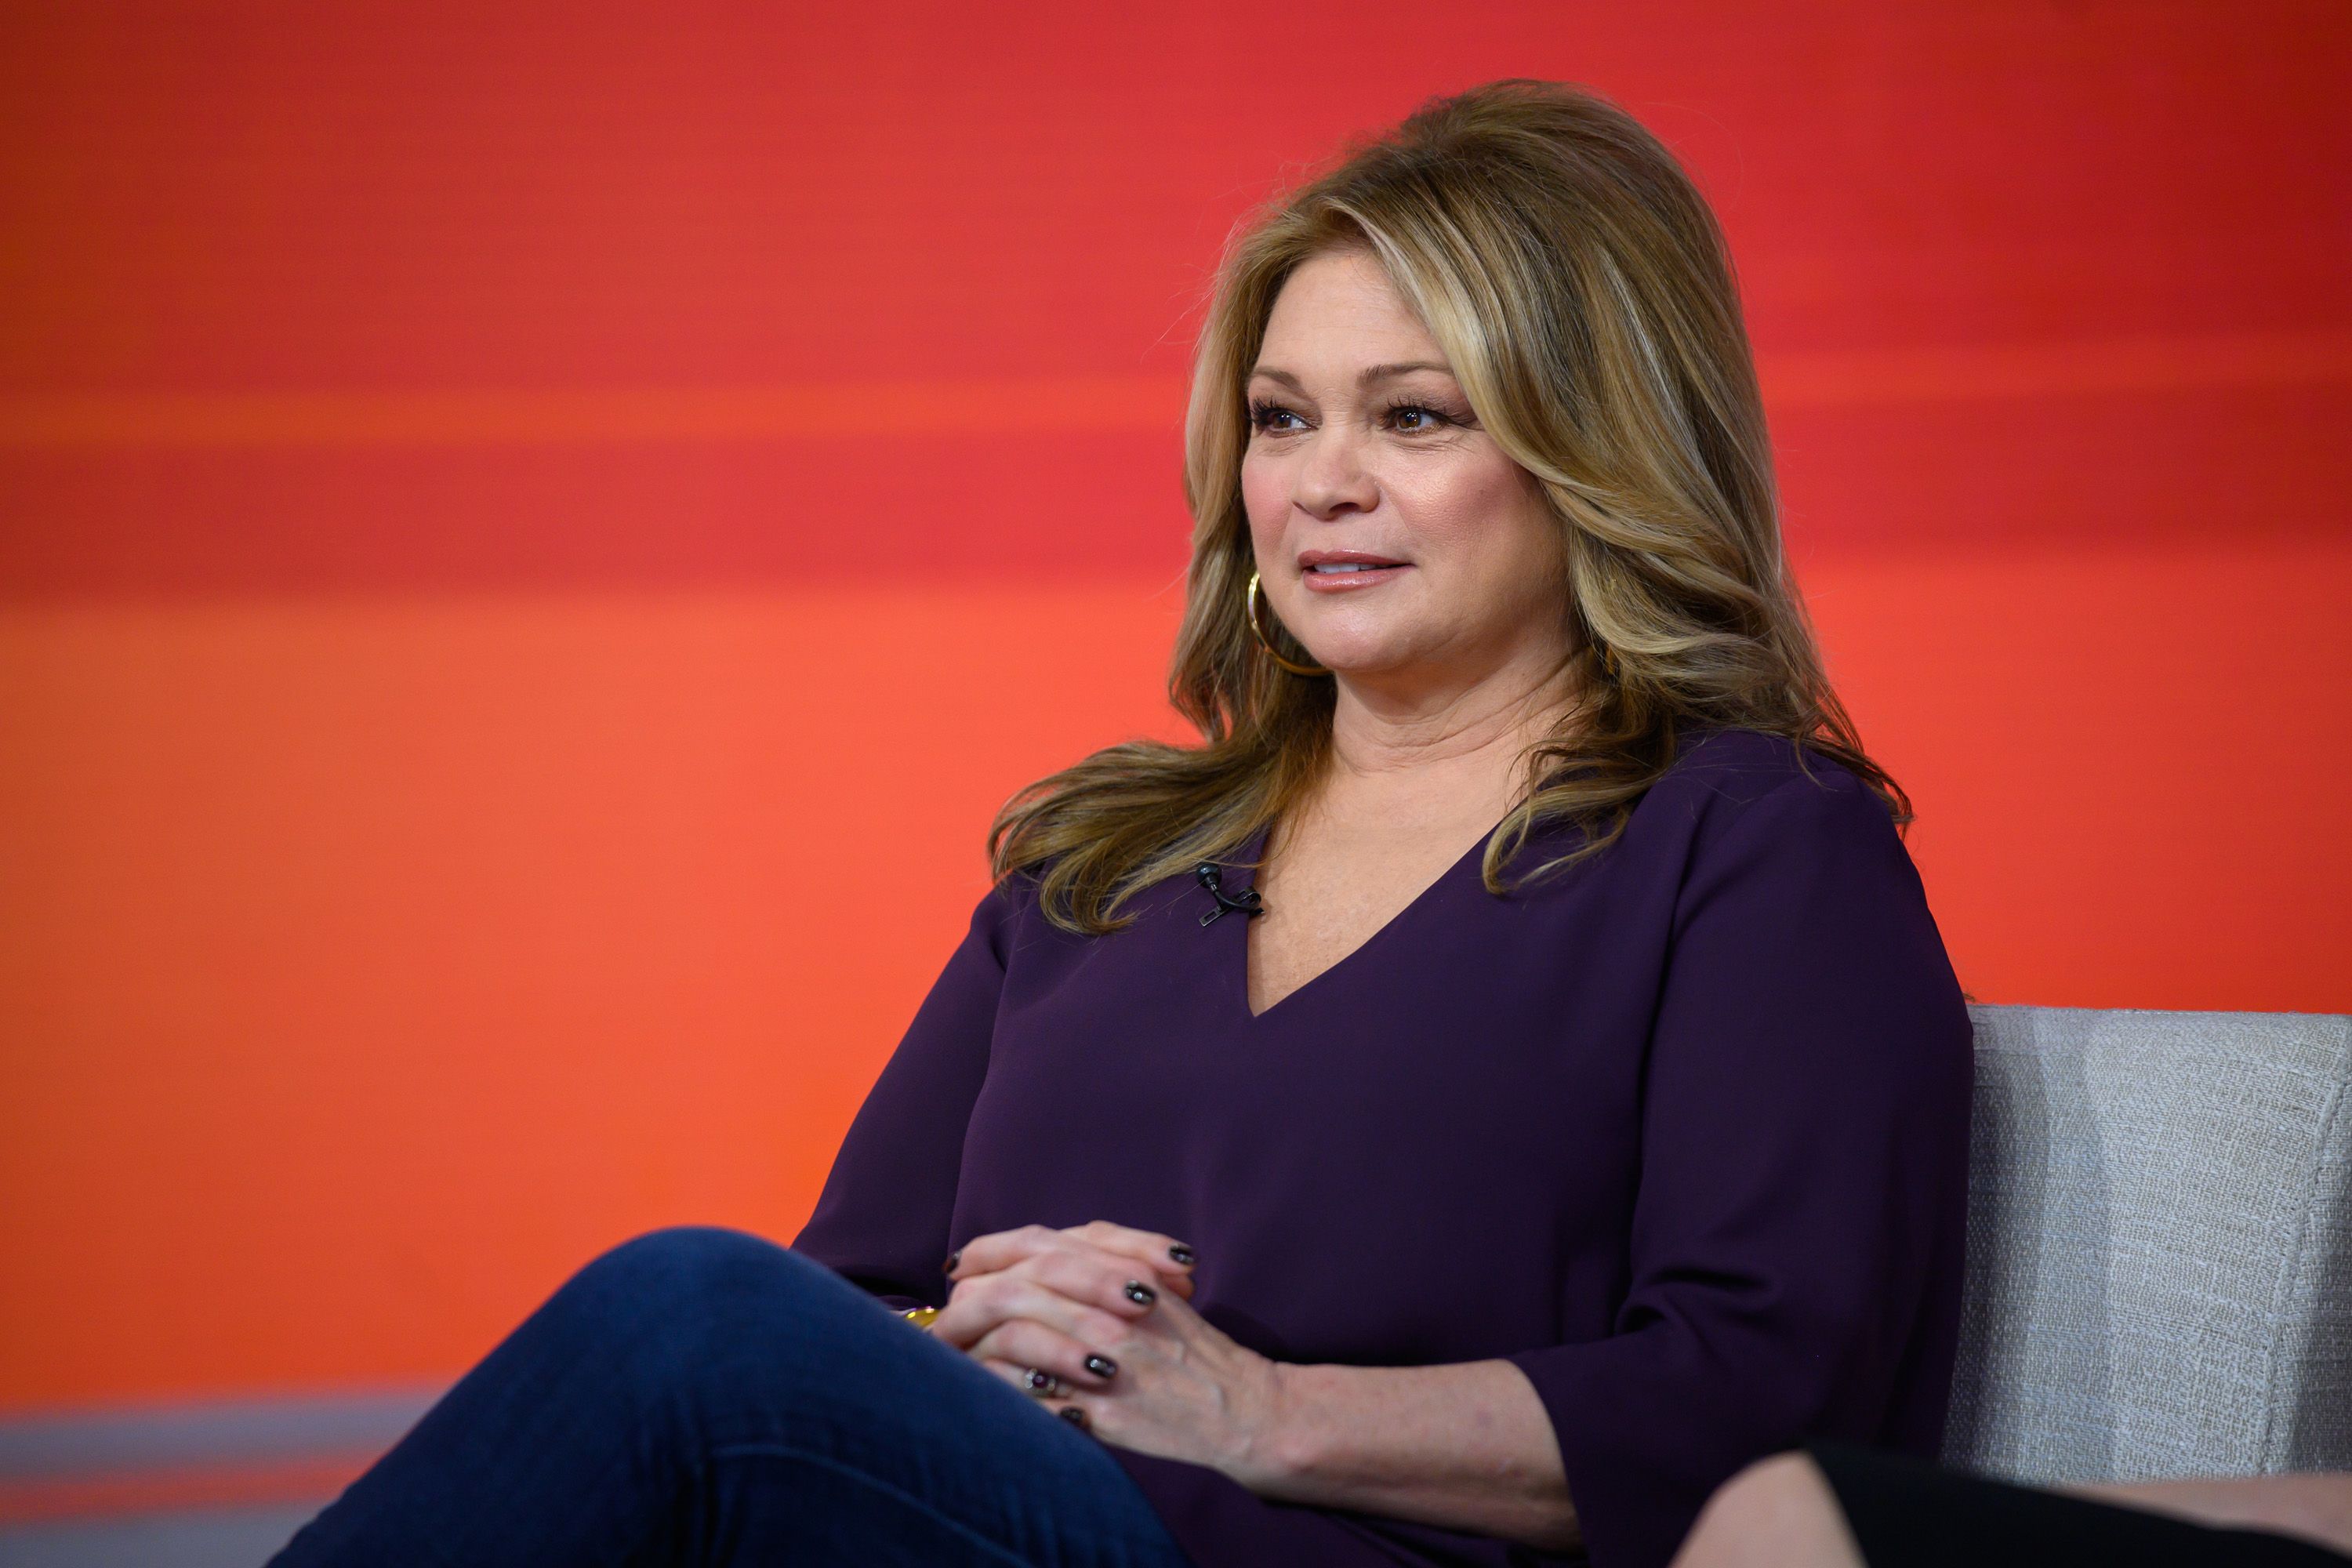 31-facts-about-valerie-bertinelli